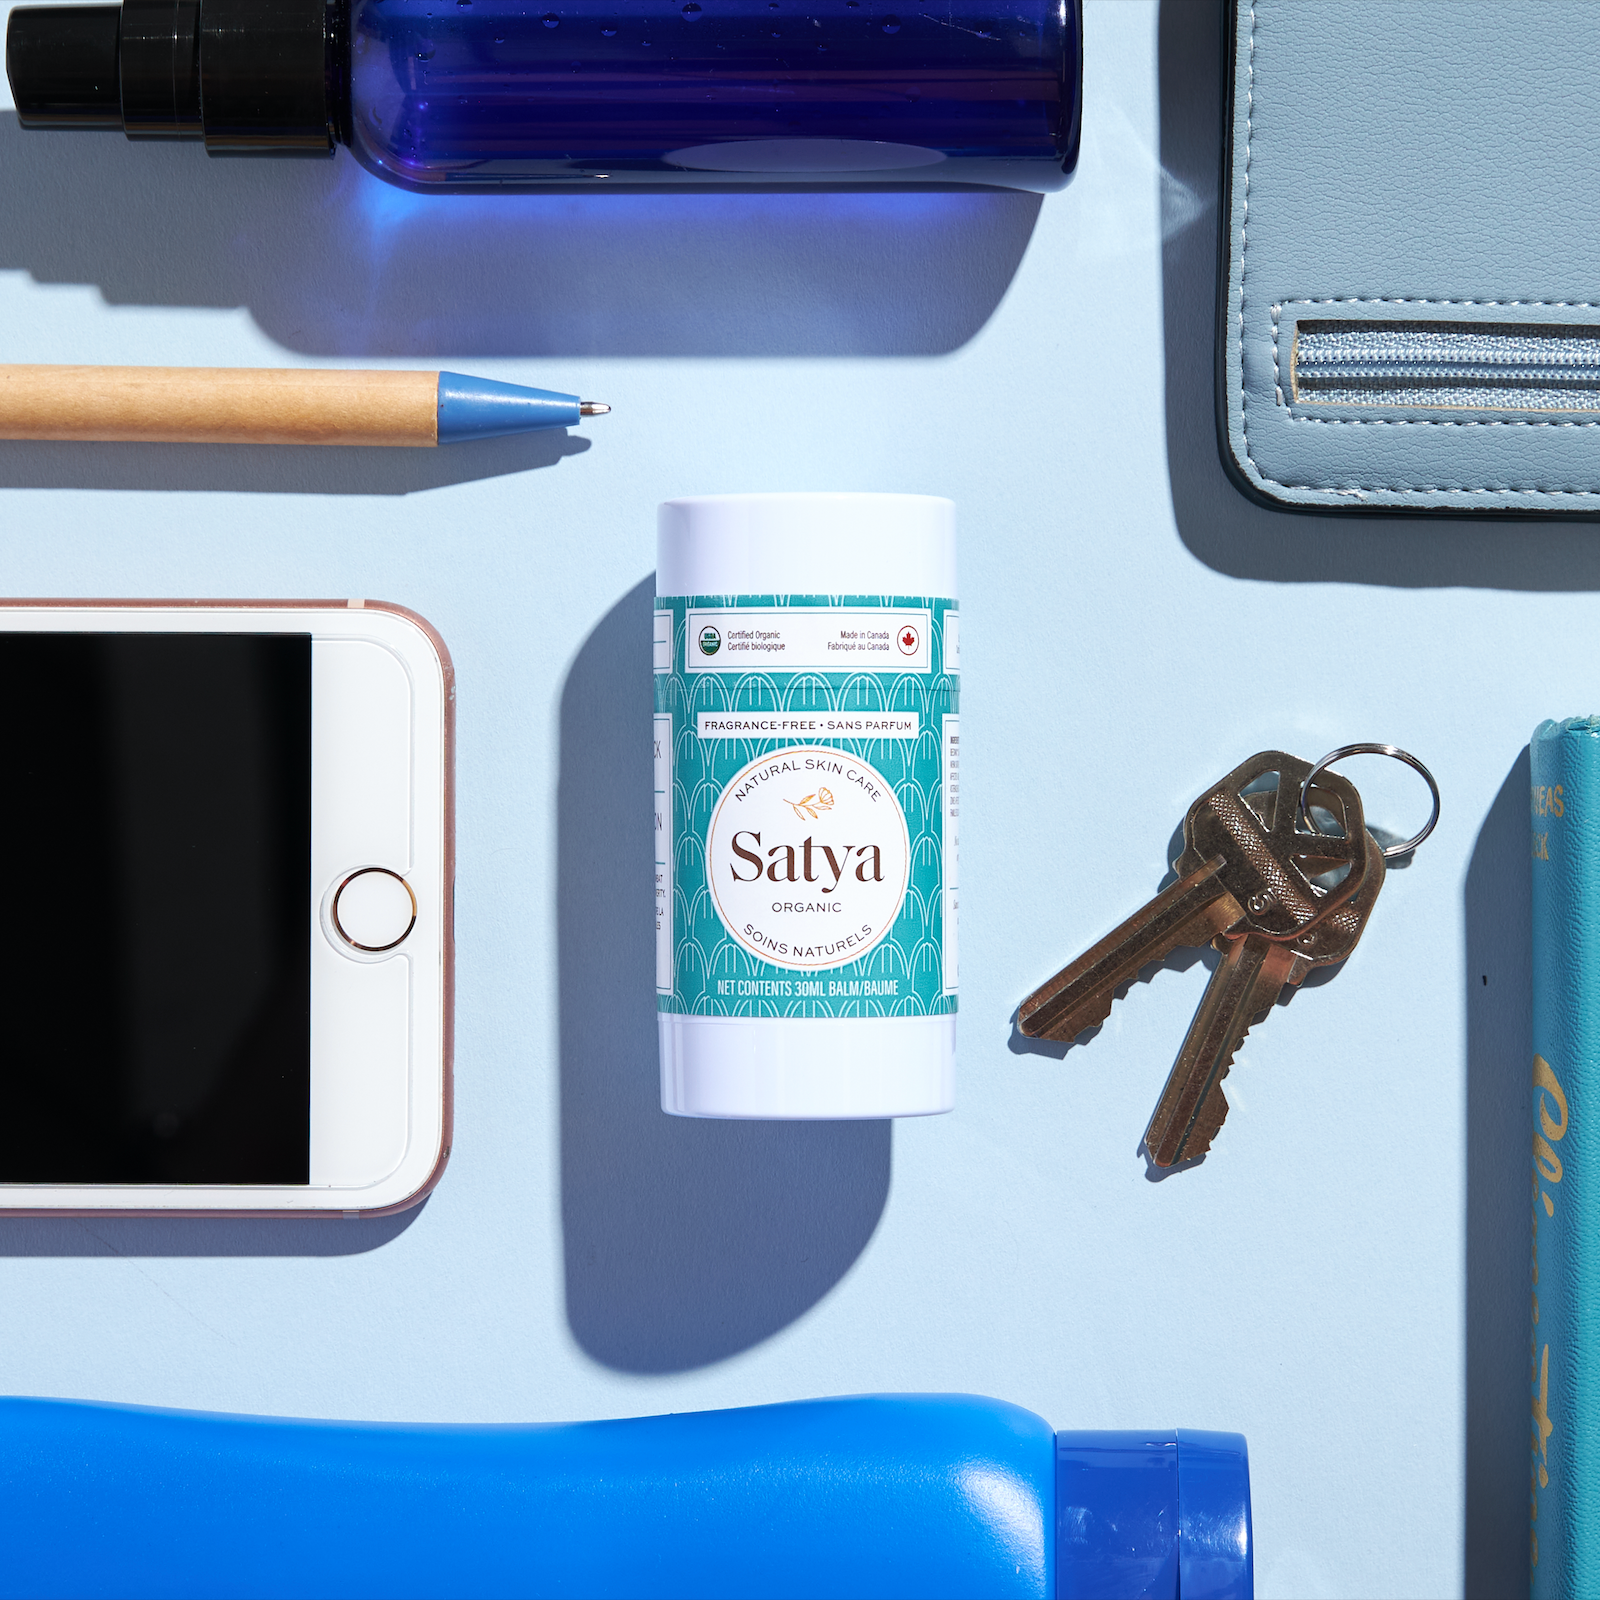 Satya Multi Use Easy Glide Stick surrounded by items used daily, such as keys, a phone, a pen, a water bottle, and a bag.